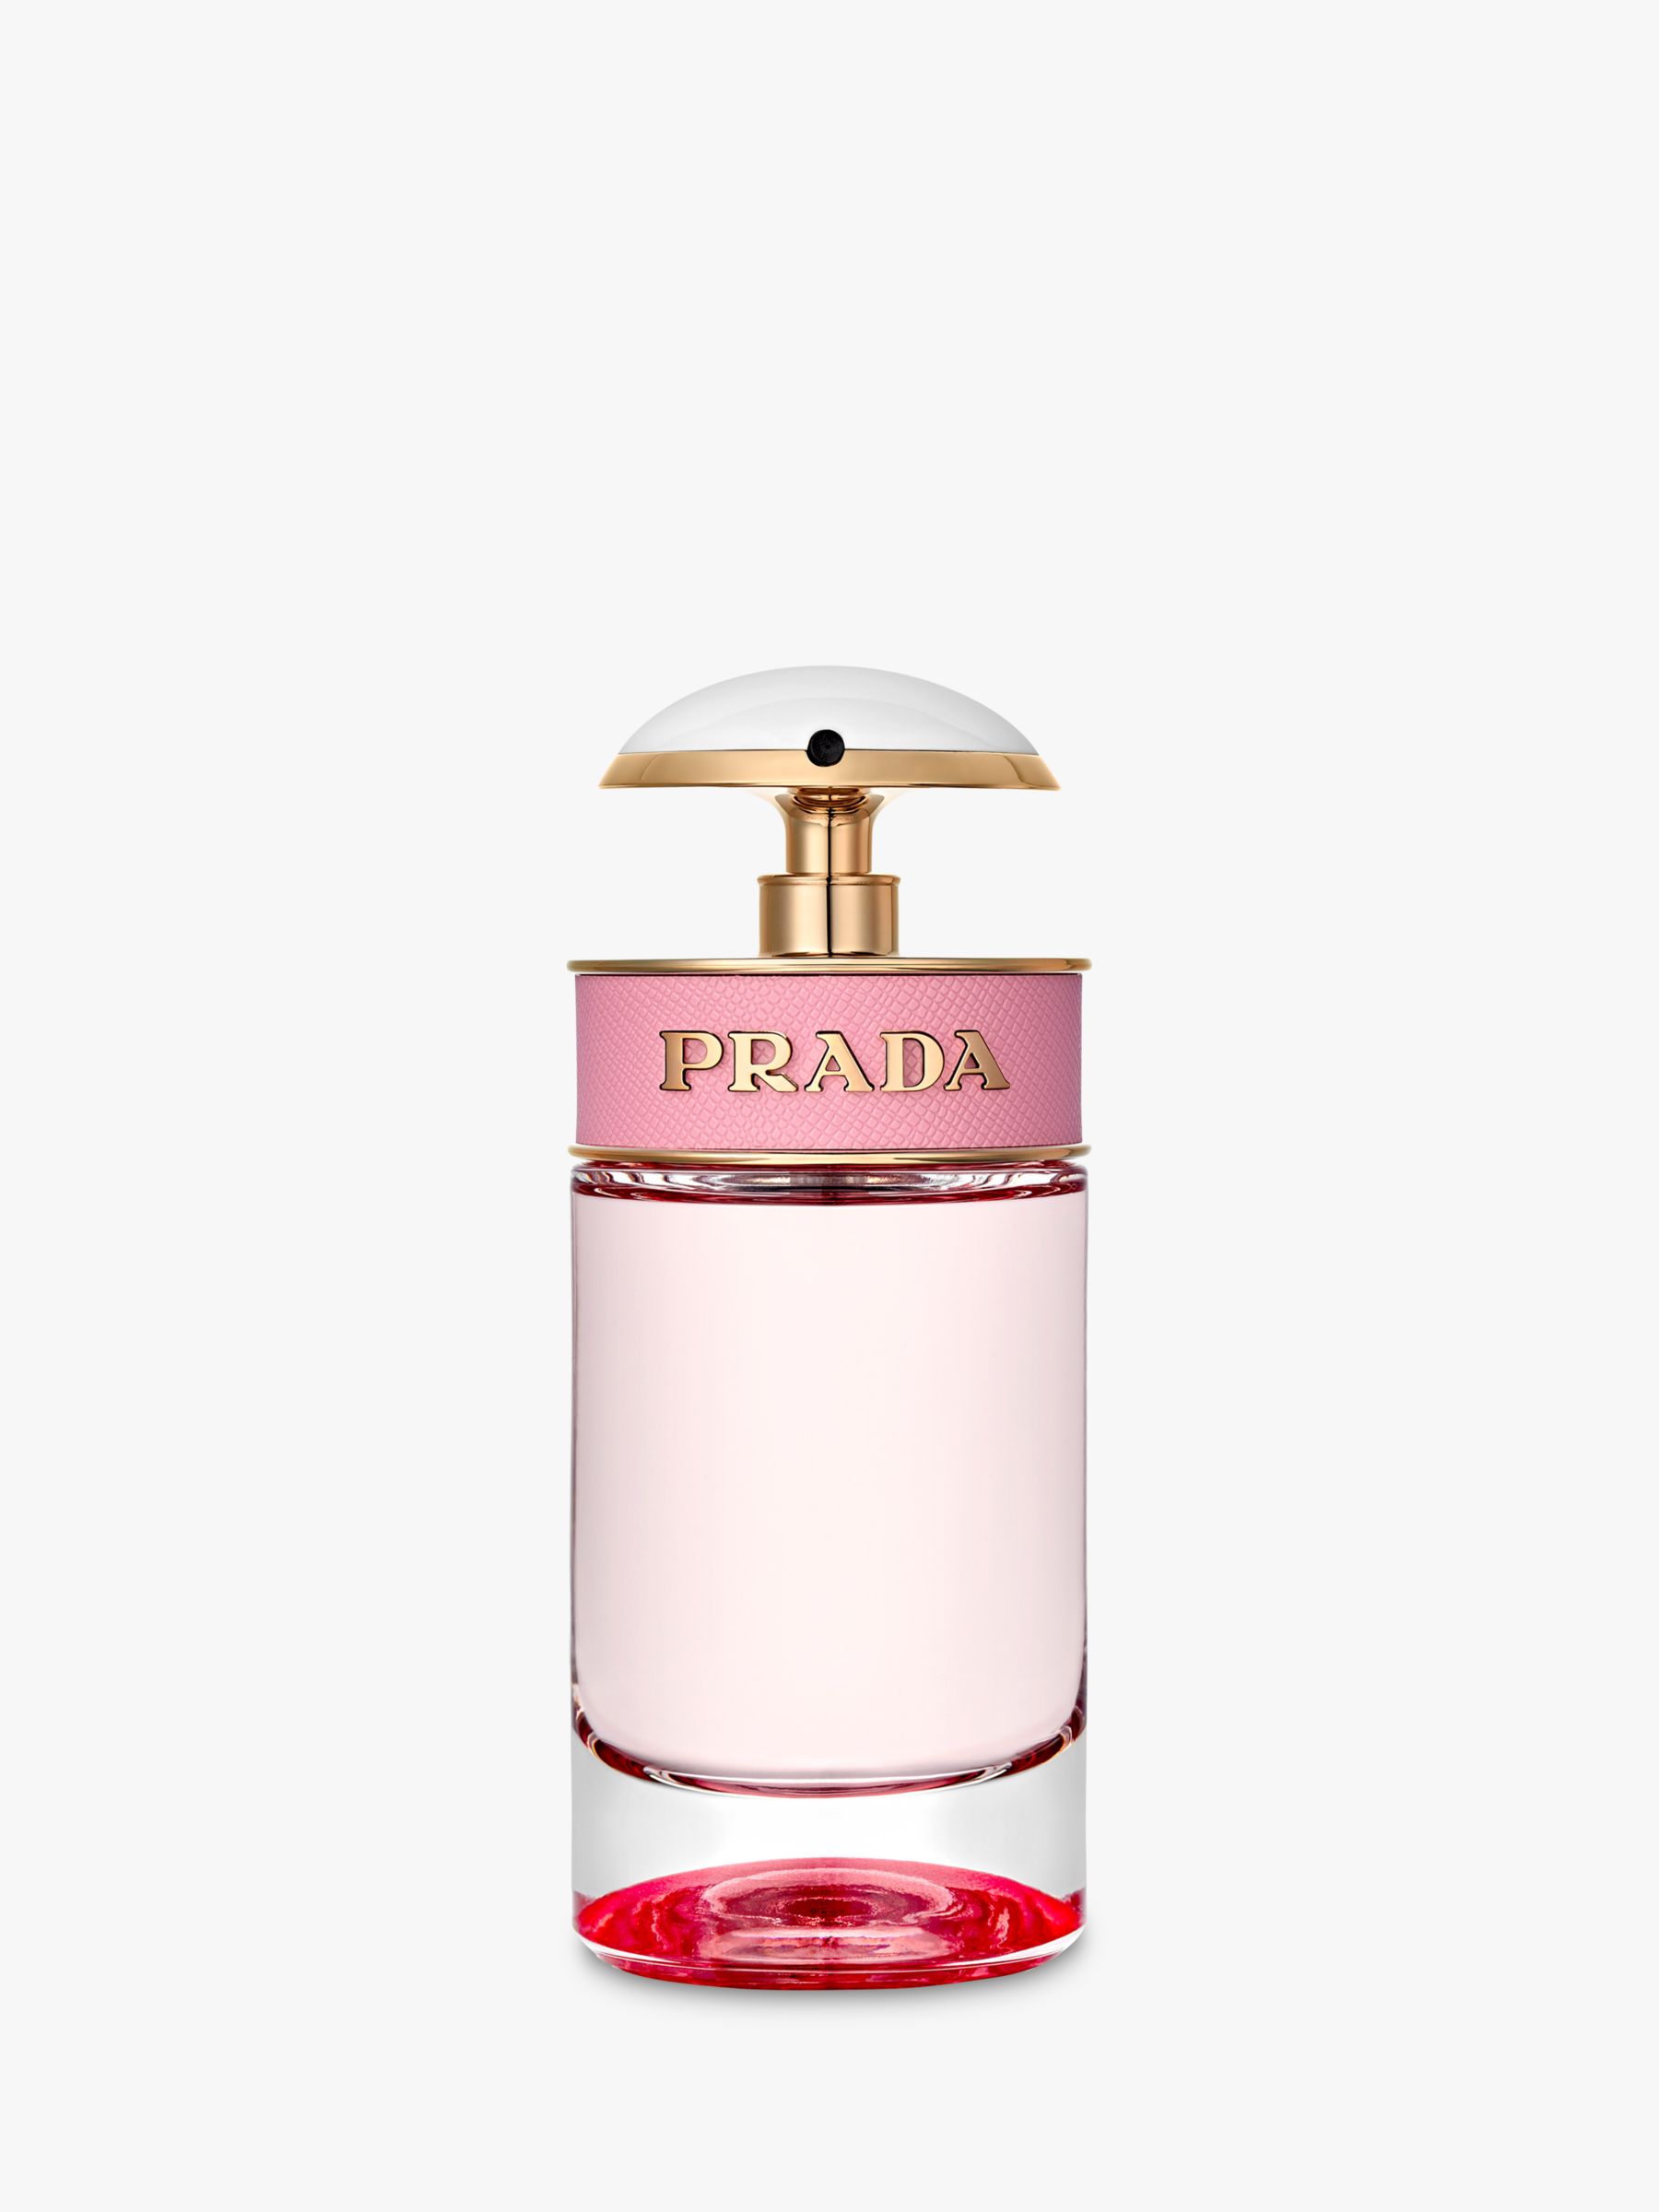 prada candy florale review